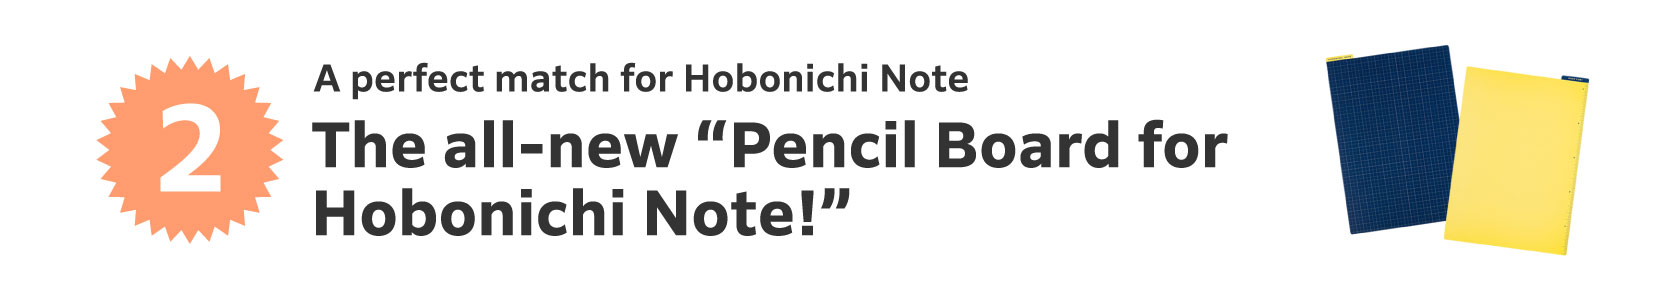 A perfect match for Hobonichi Note The all-new “Pencil Board for Hobonichi Note!”